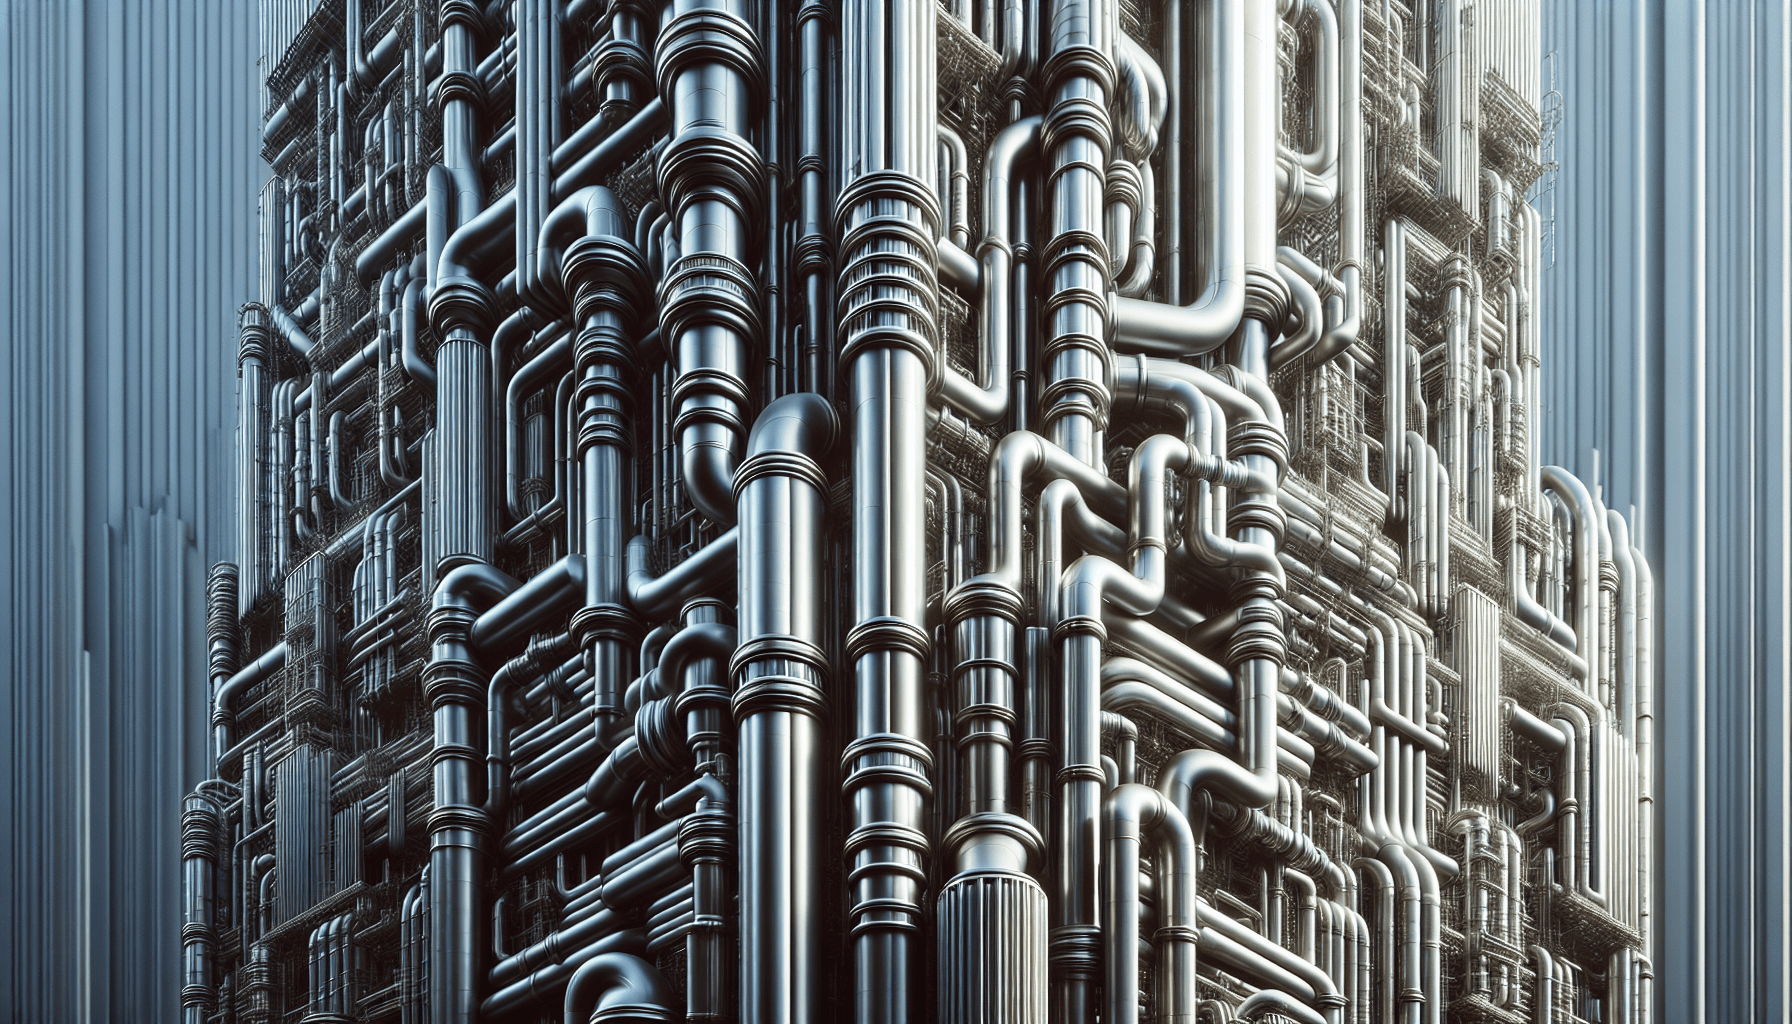 The Intricacies Of Plumbing In Skyscrapers